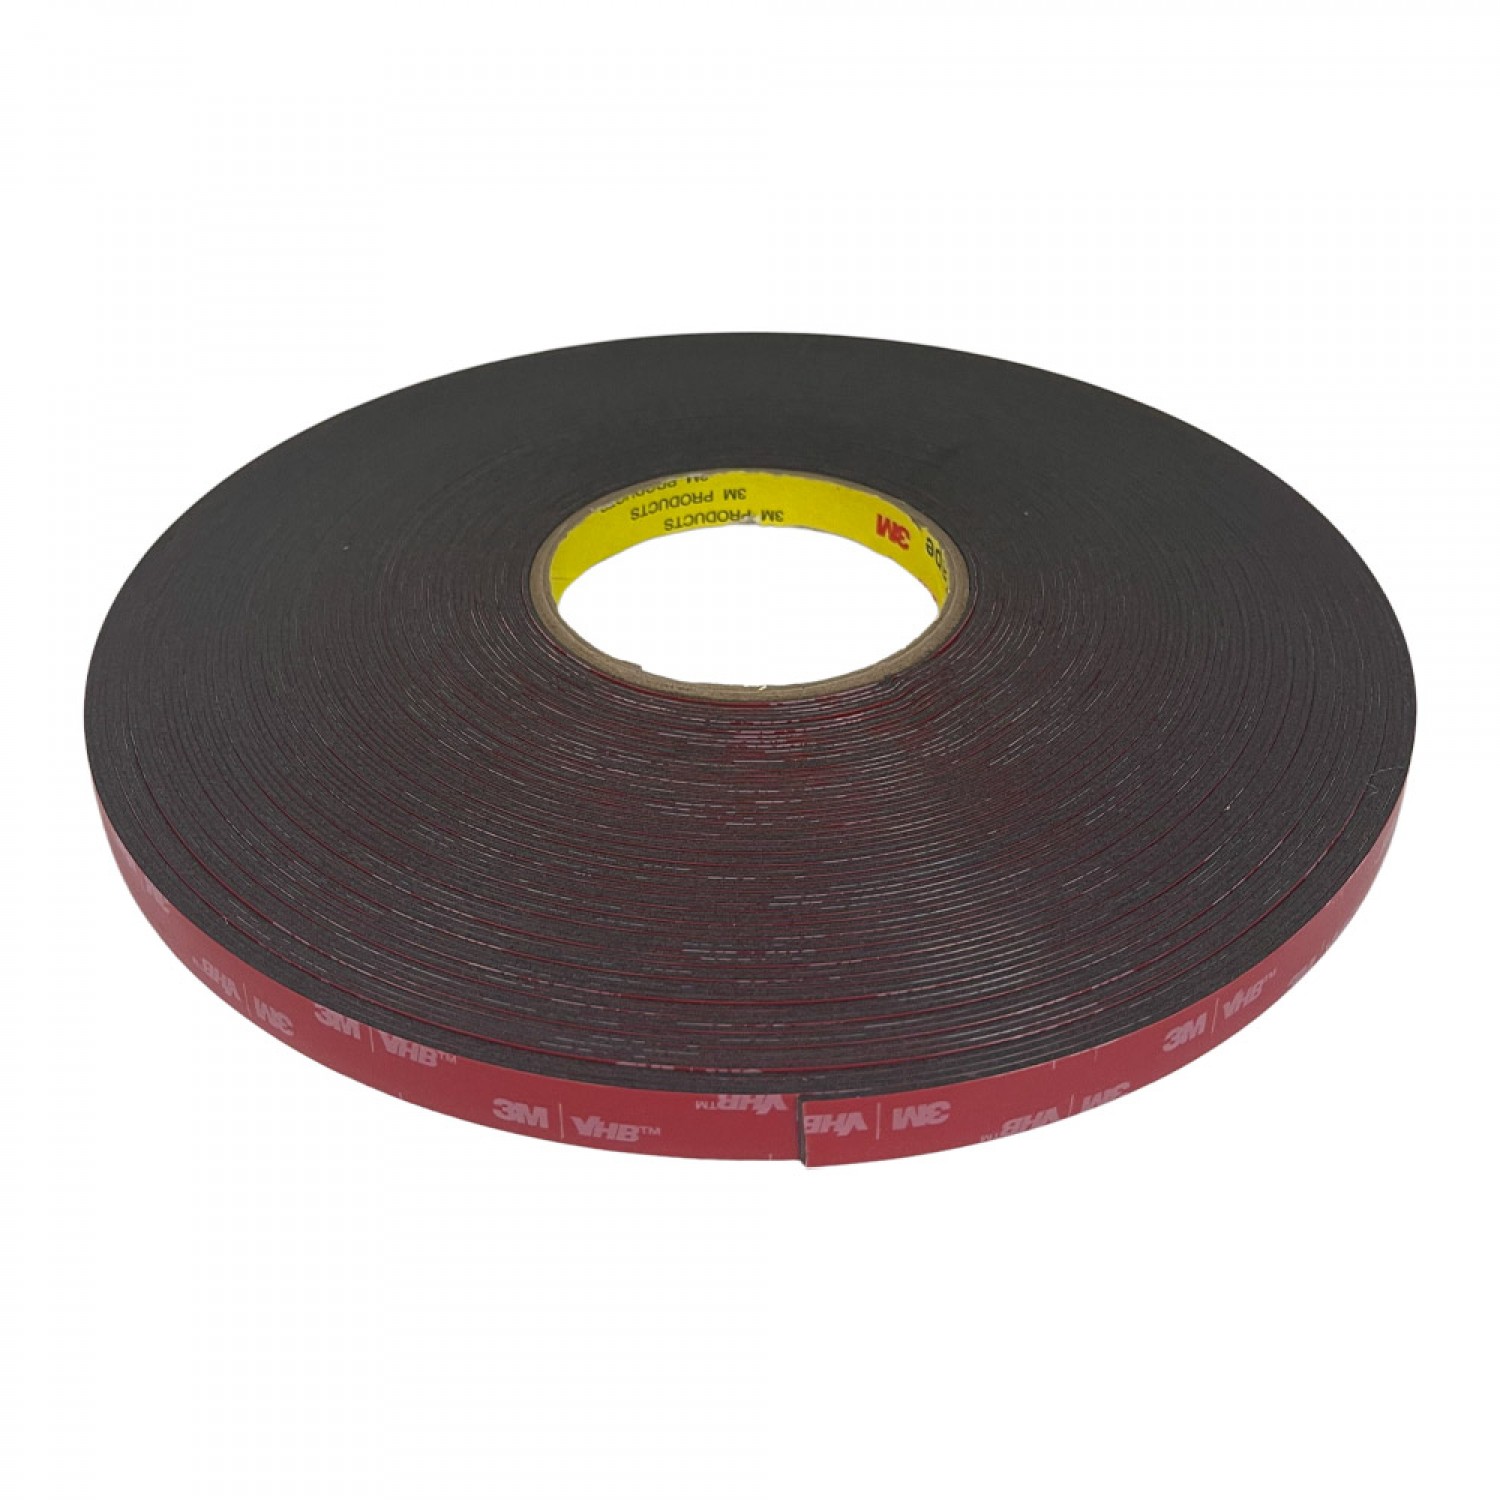  3M Double Sided Tape 2 Pack, 23ft+15ft Mounting Tape